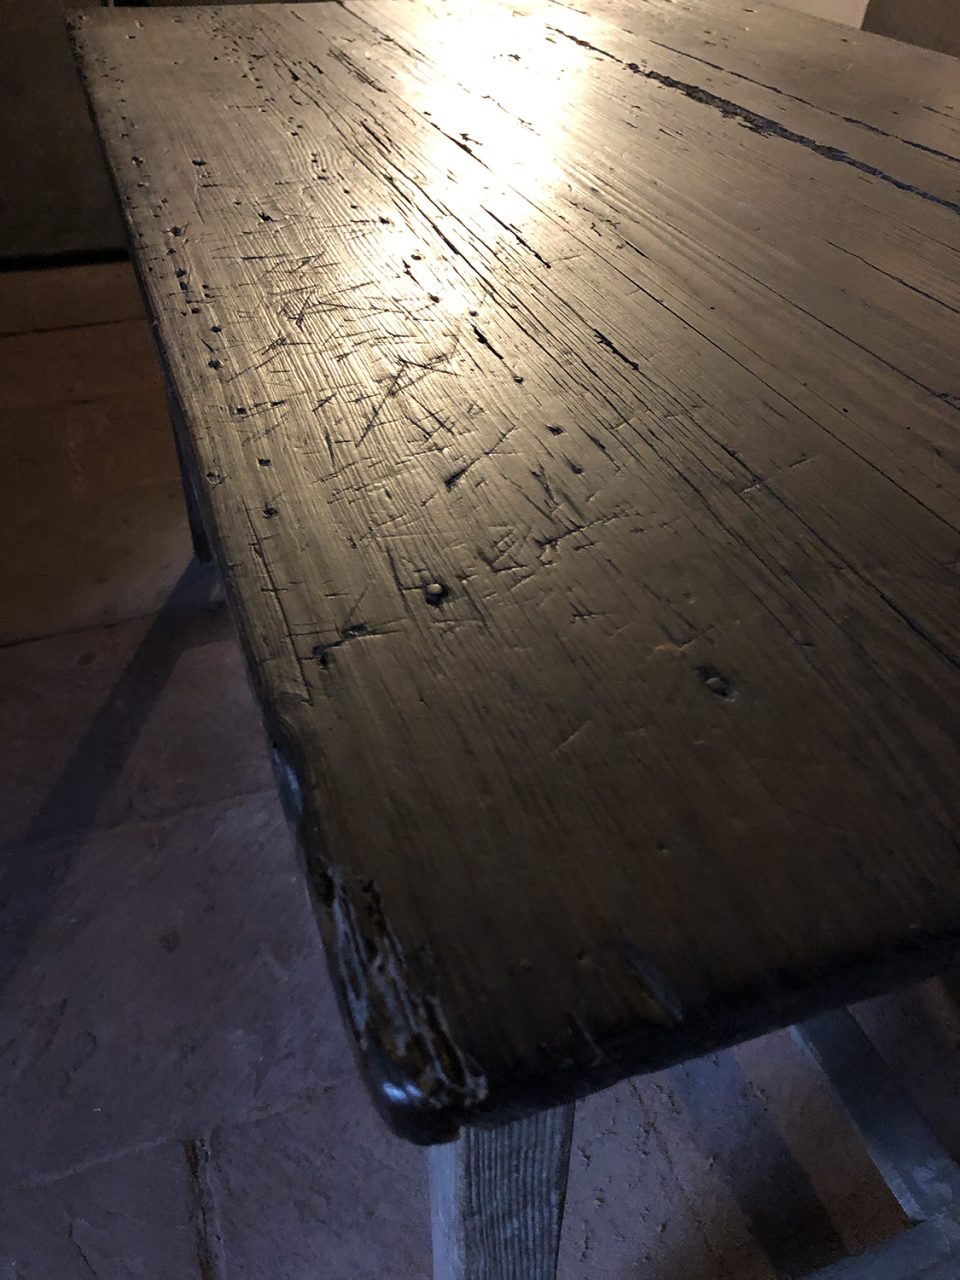 Marked surface of the old kitchen work table.